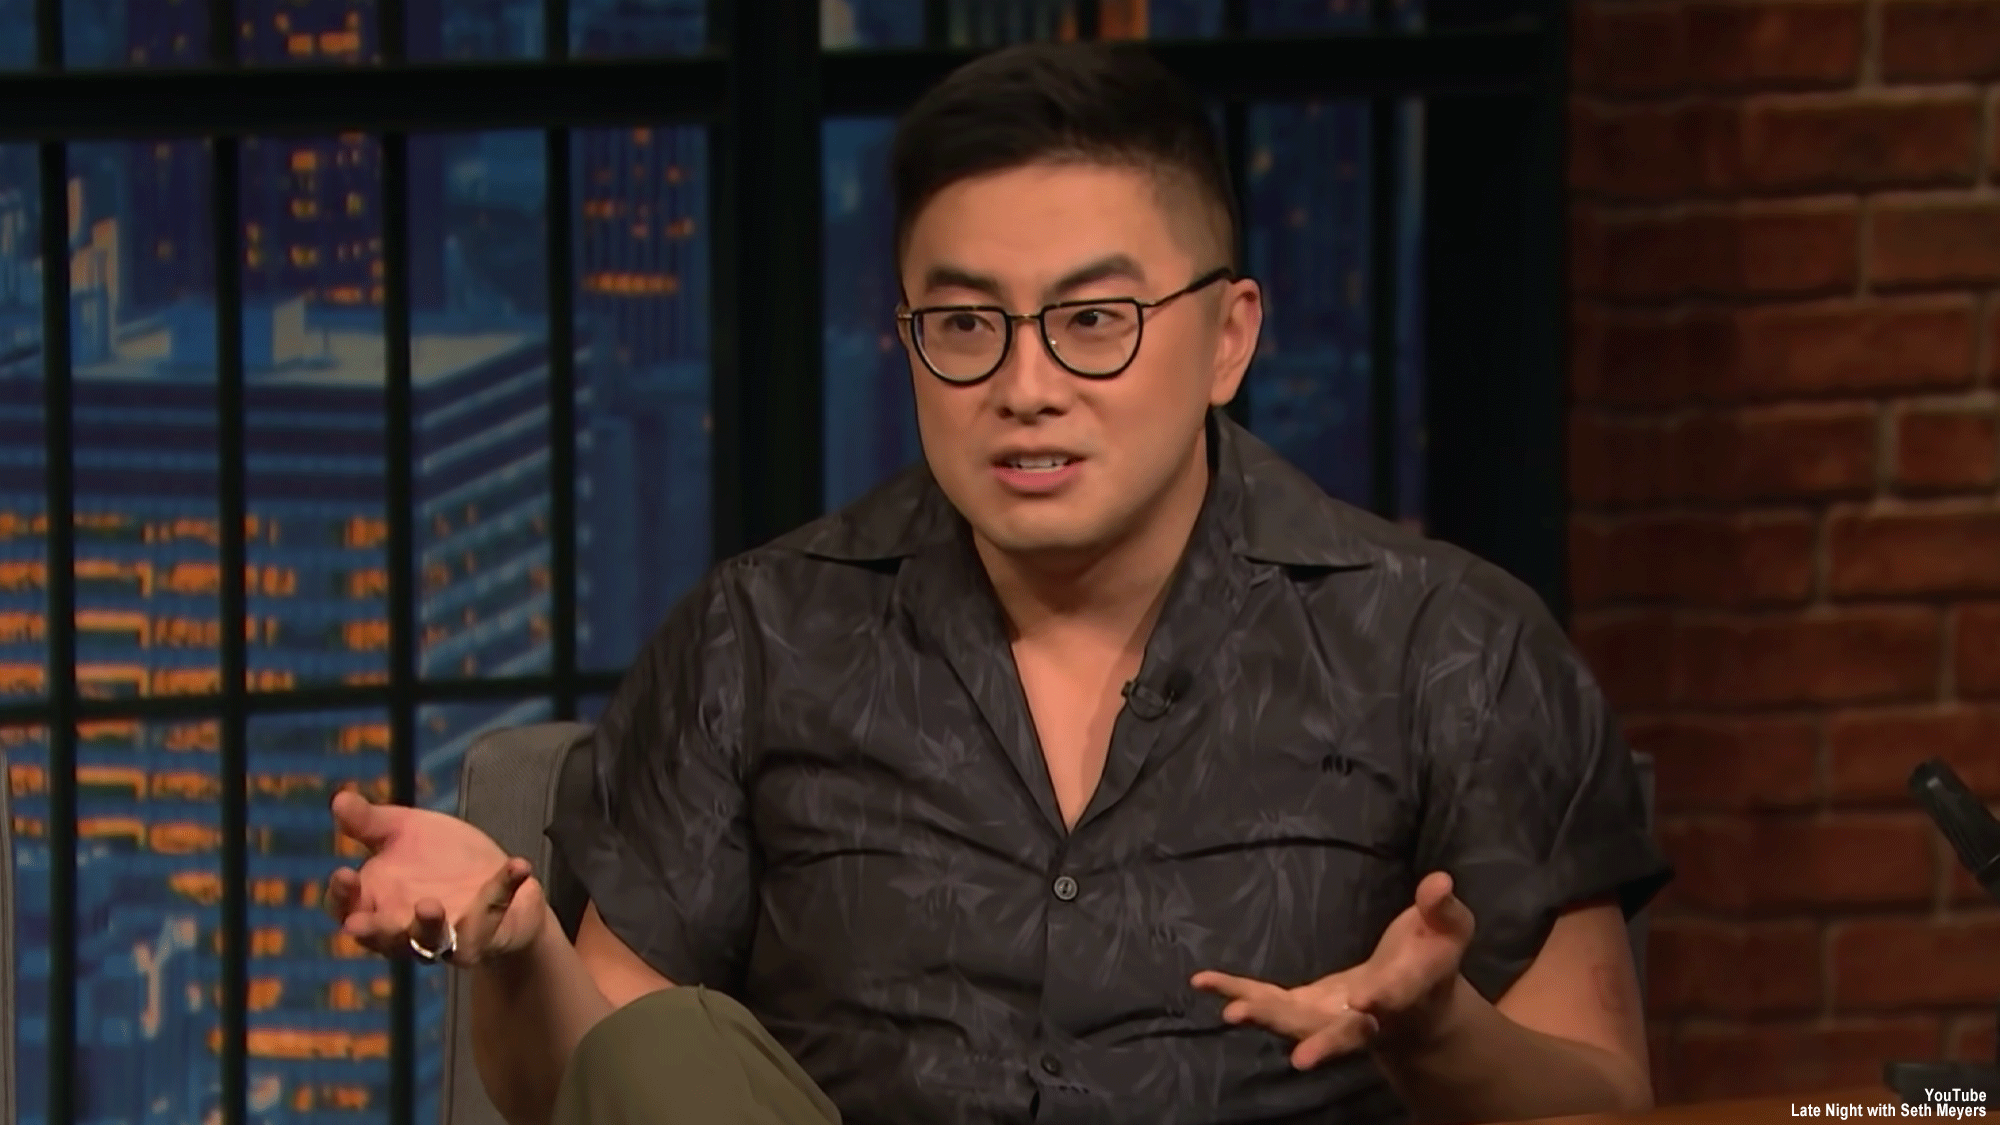 Get A Look At Snl S Bowen Yang In A Crotchless Mesh Singlet